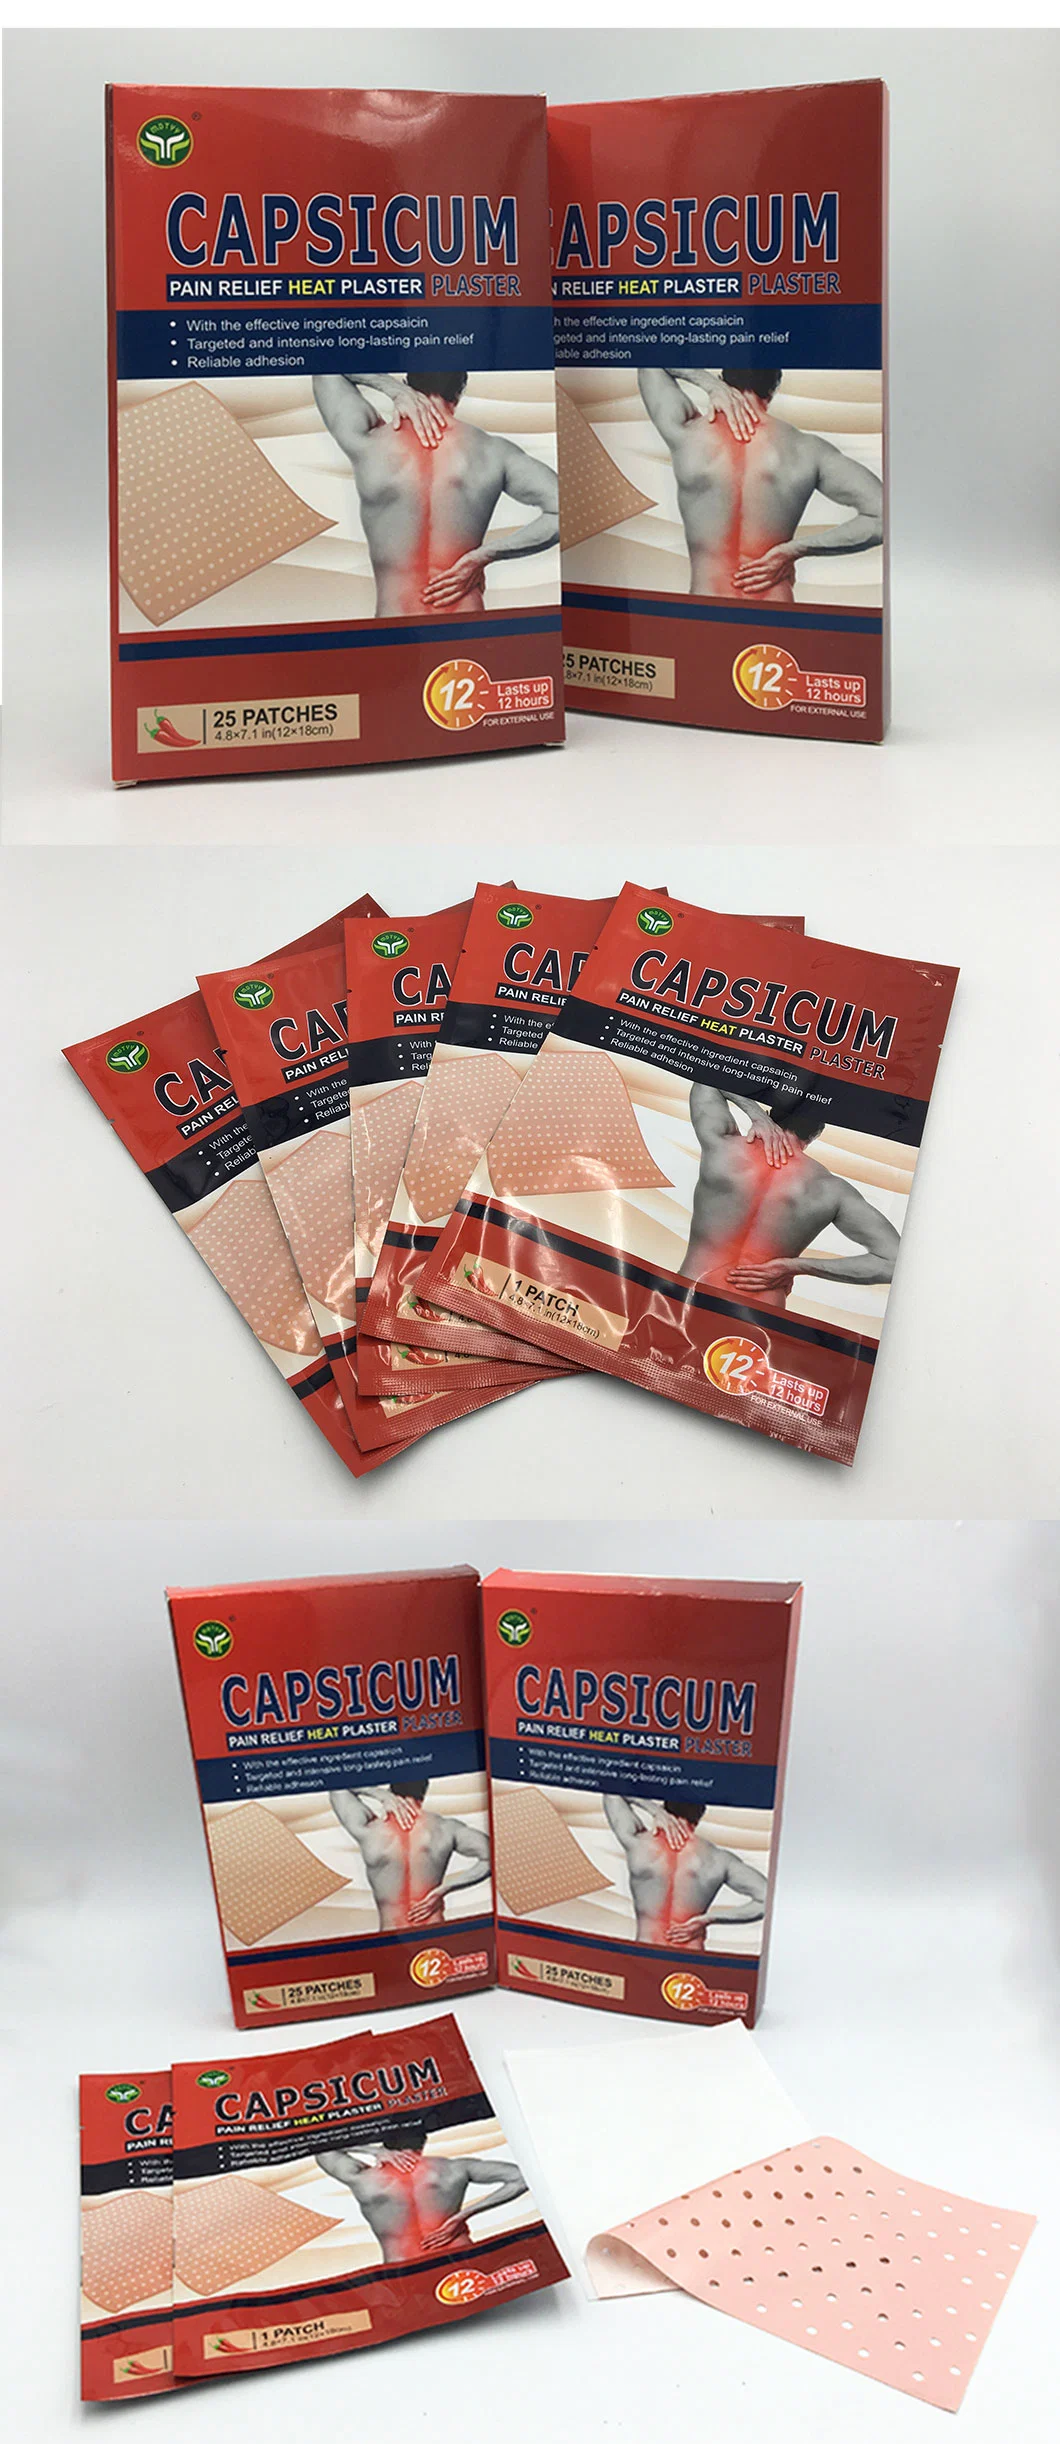 China Medical Porous Large Hot Pain Relief Capsicum Tiger Heat Rheumatism Plaster for Pain